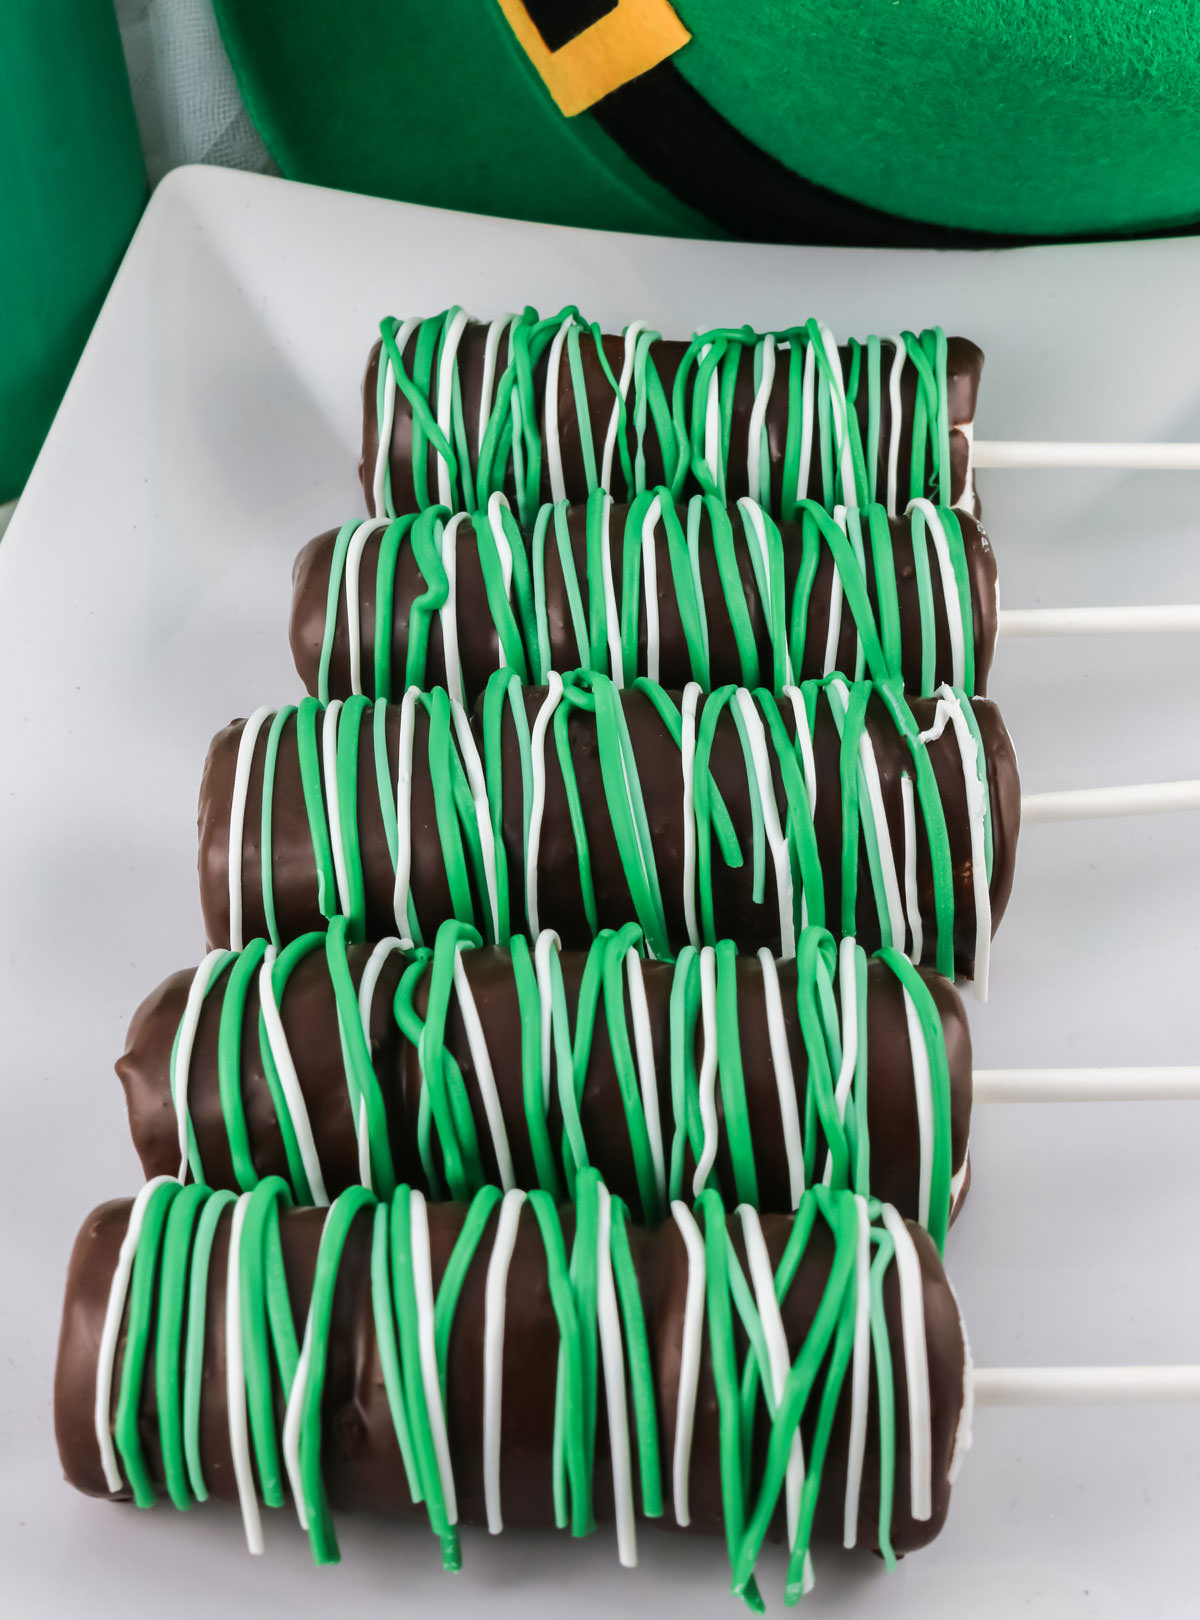 Five St. Patrick's Day Marshmallow Pops laying on a white serving platter in front of a Leprechaun hat.